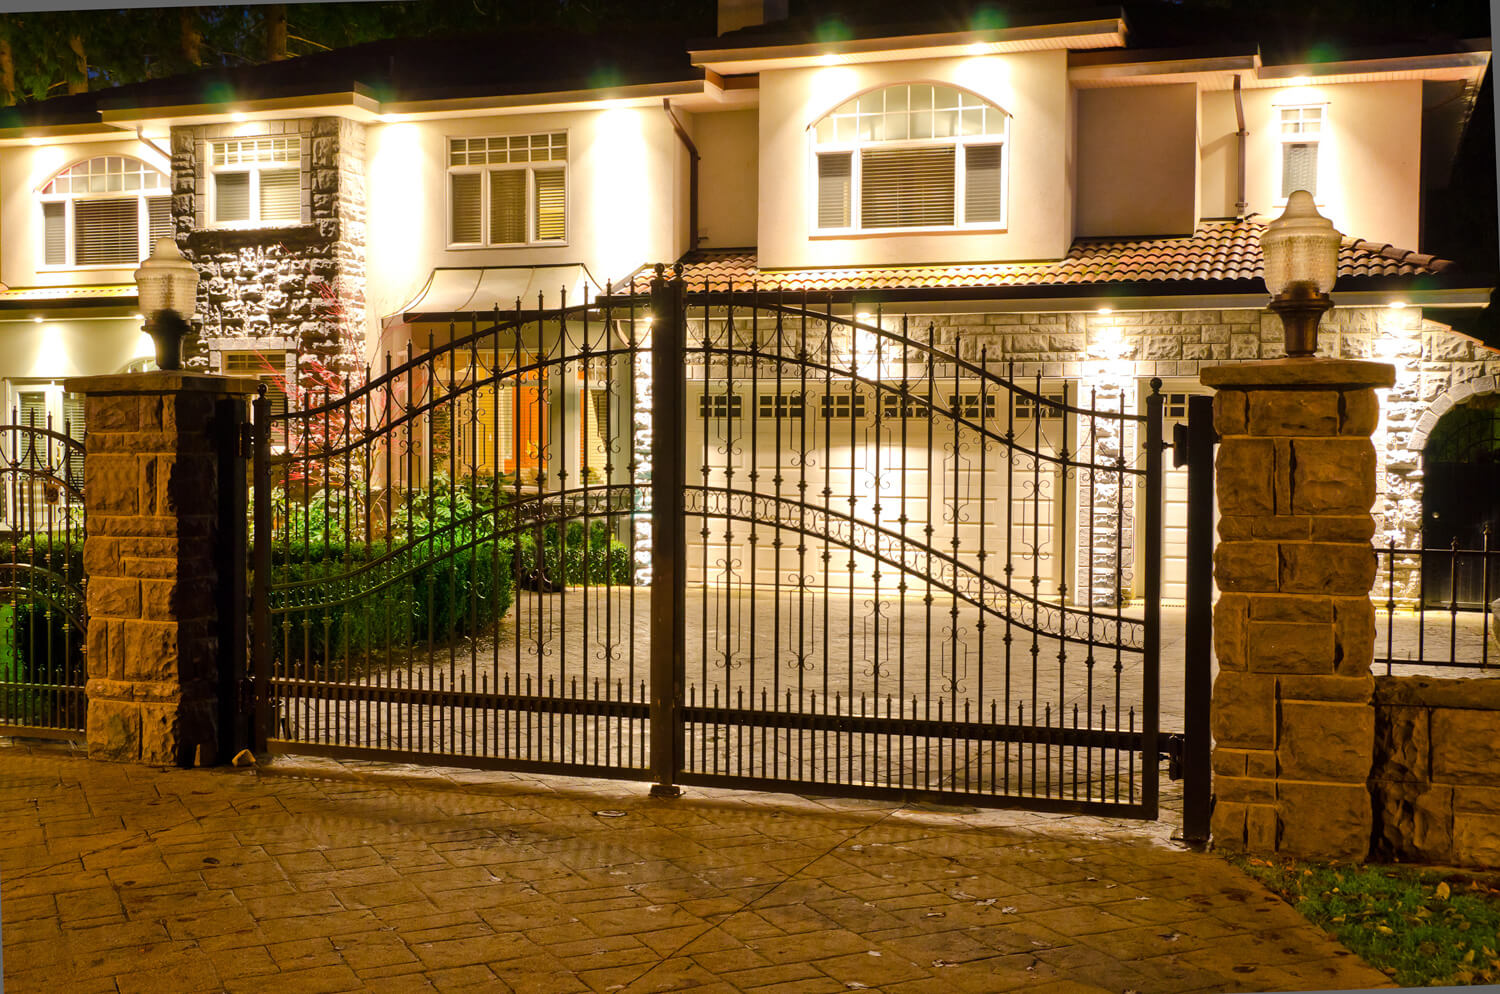 Electric gates supplied and installed by professional engineers in Purley, Surrey gate automation company